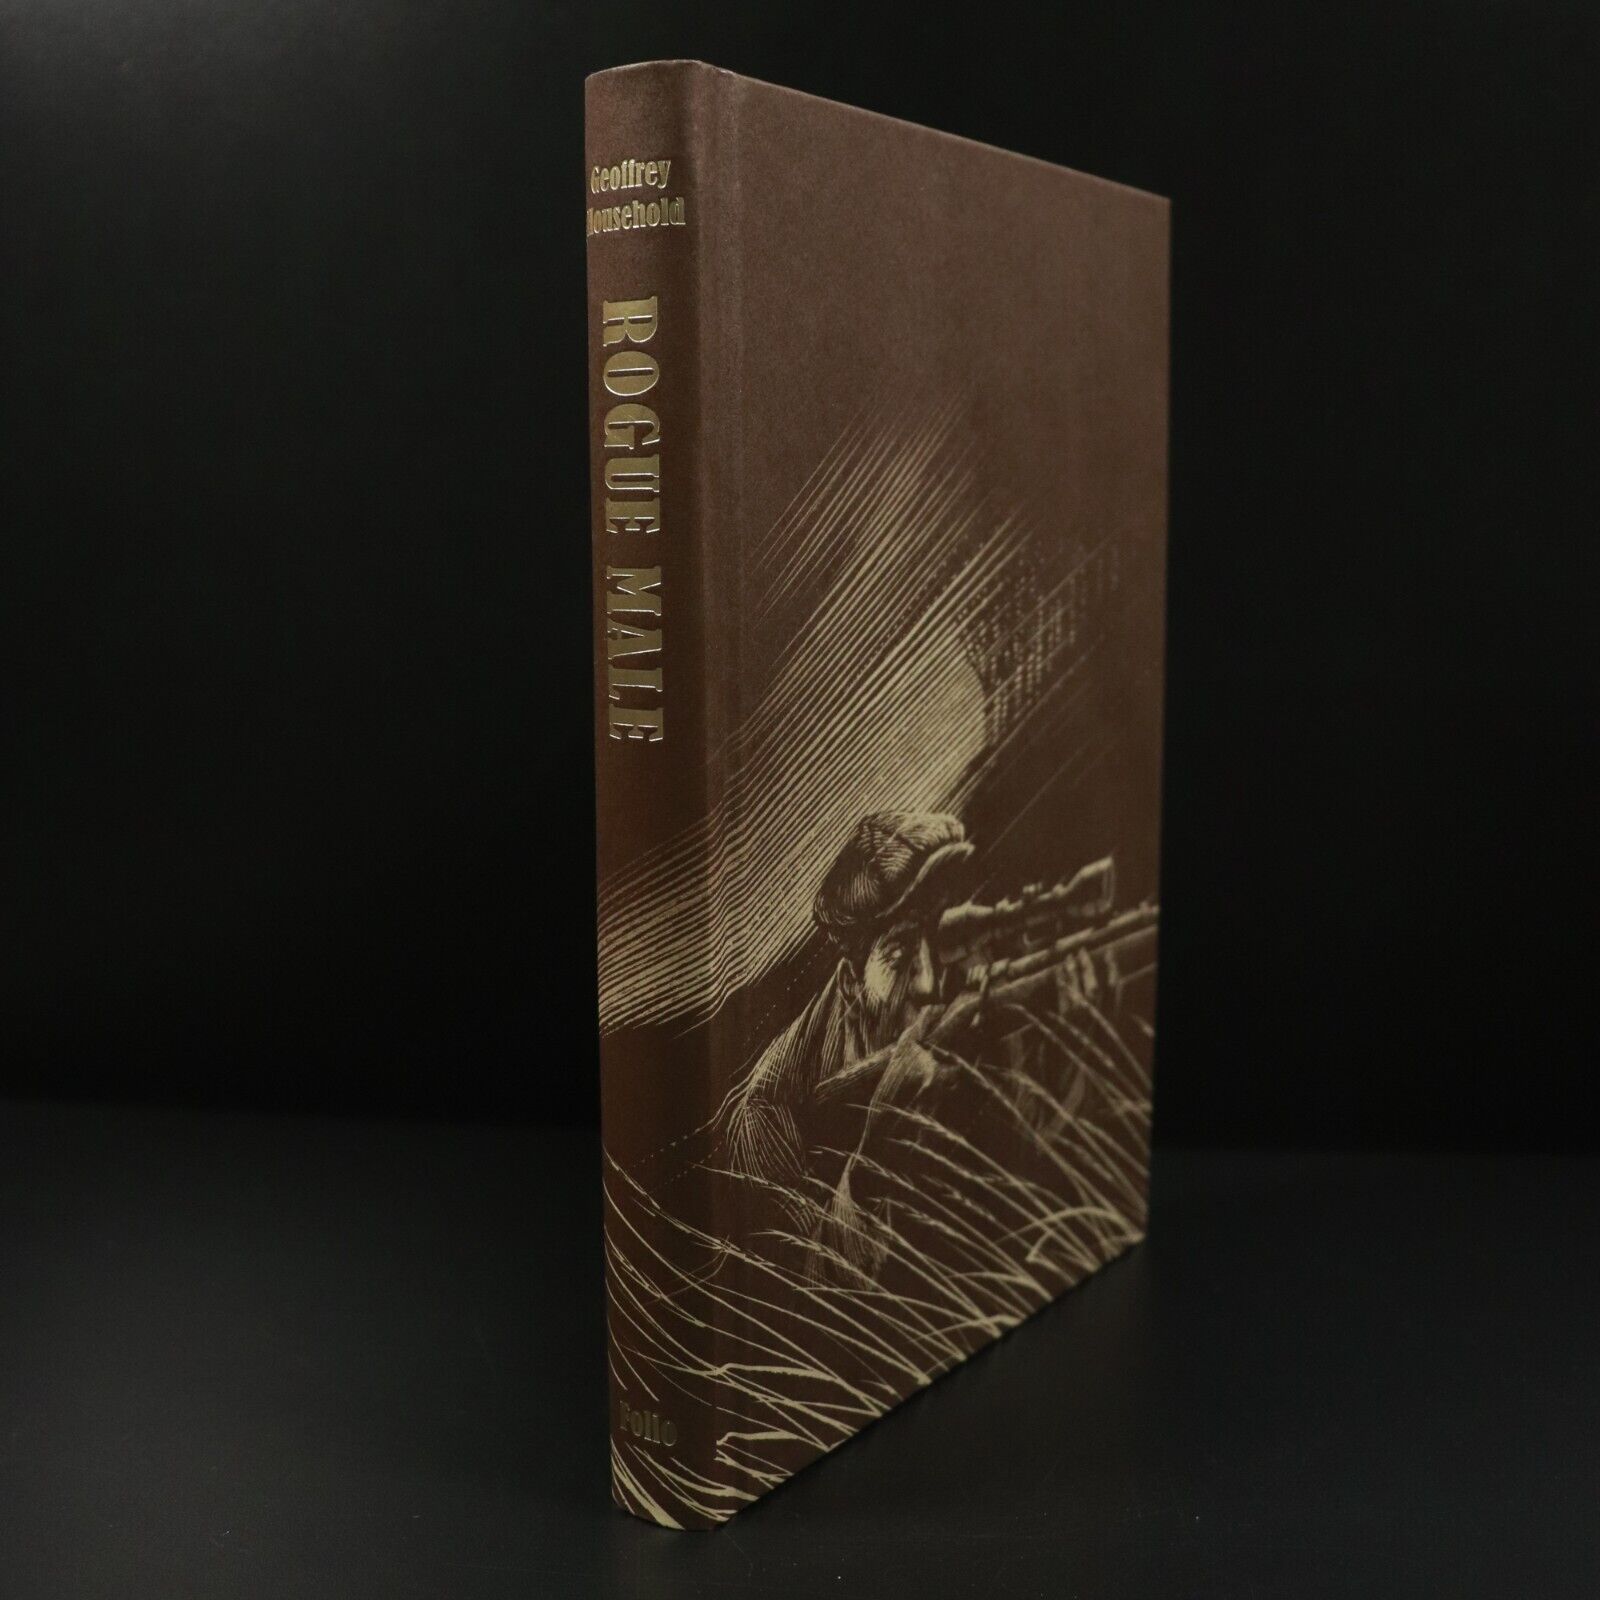 Rogue Male by Geoffrey Household - 2013 - Folio Society Thriller Fiction Book